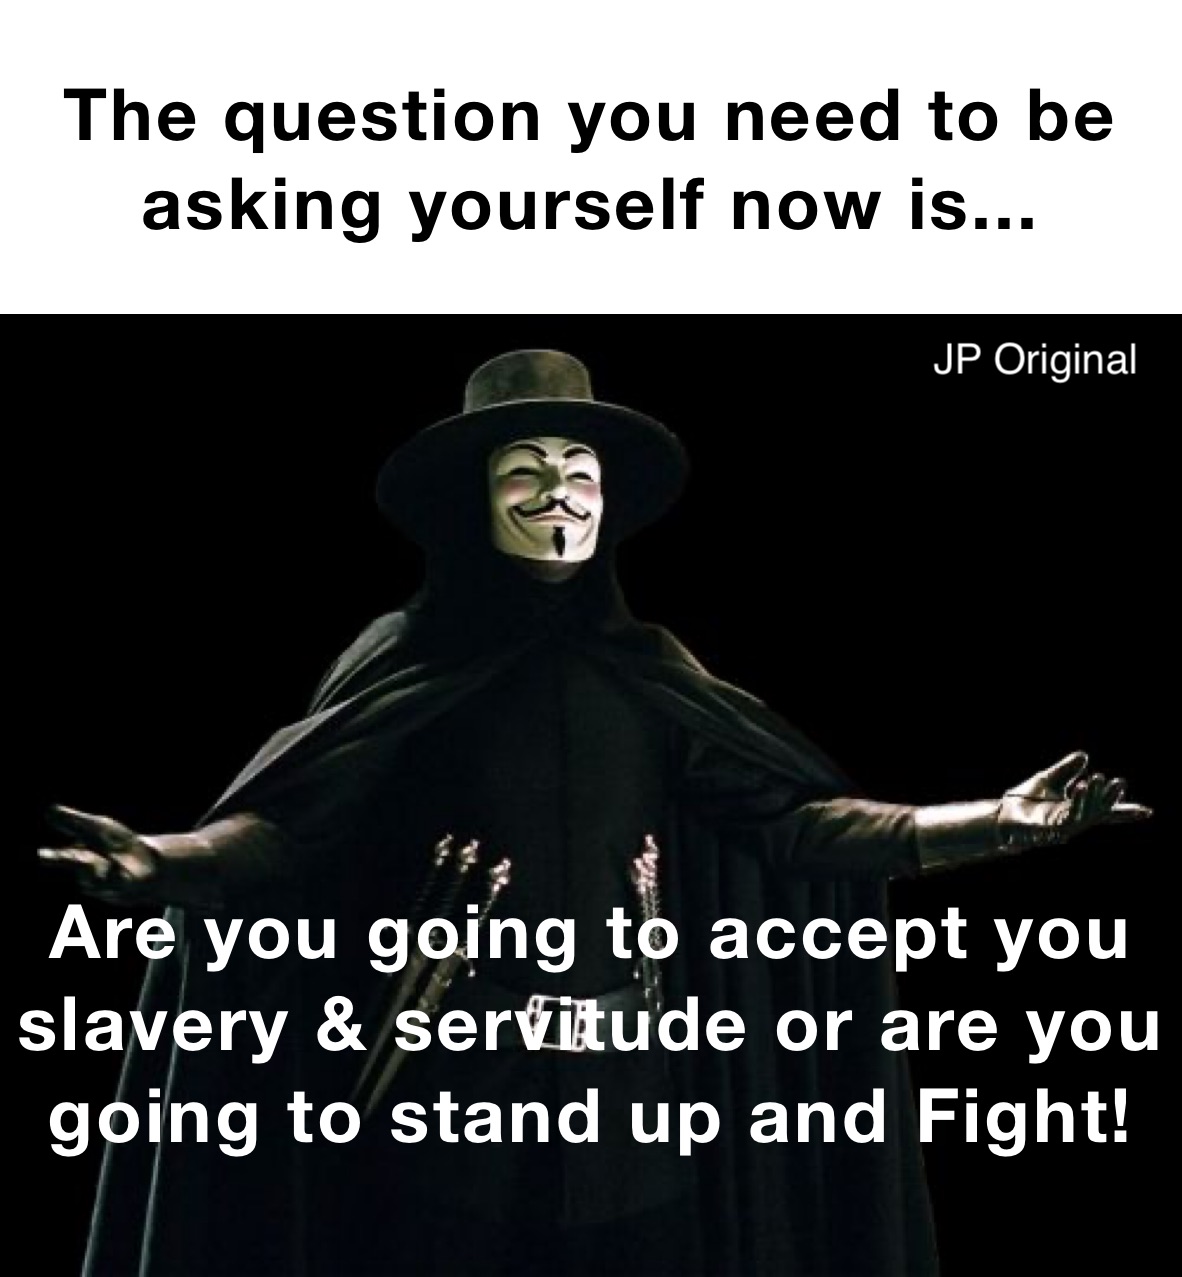 The question you need to be asking yourself now is... Are you going to accept you slavery & servitude or are you going to stand up and Fight!